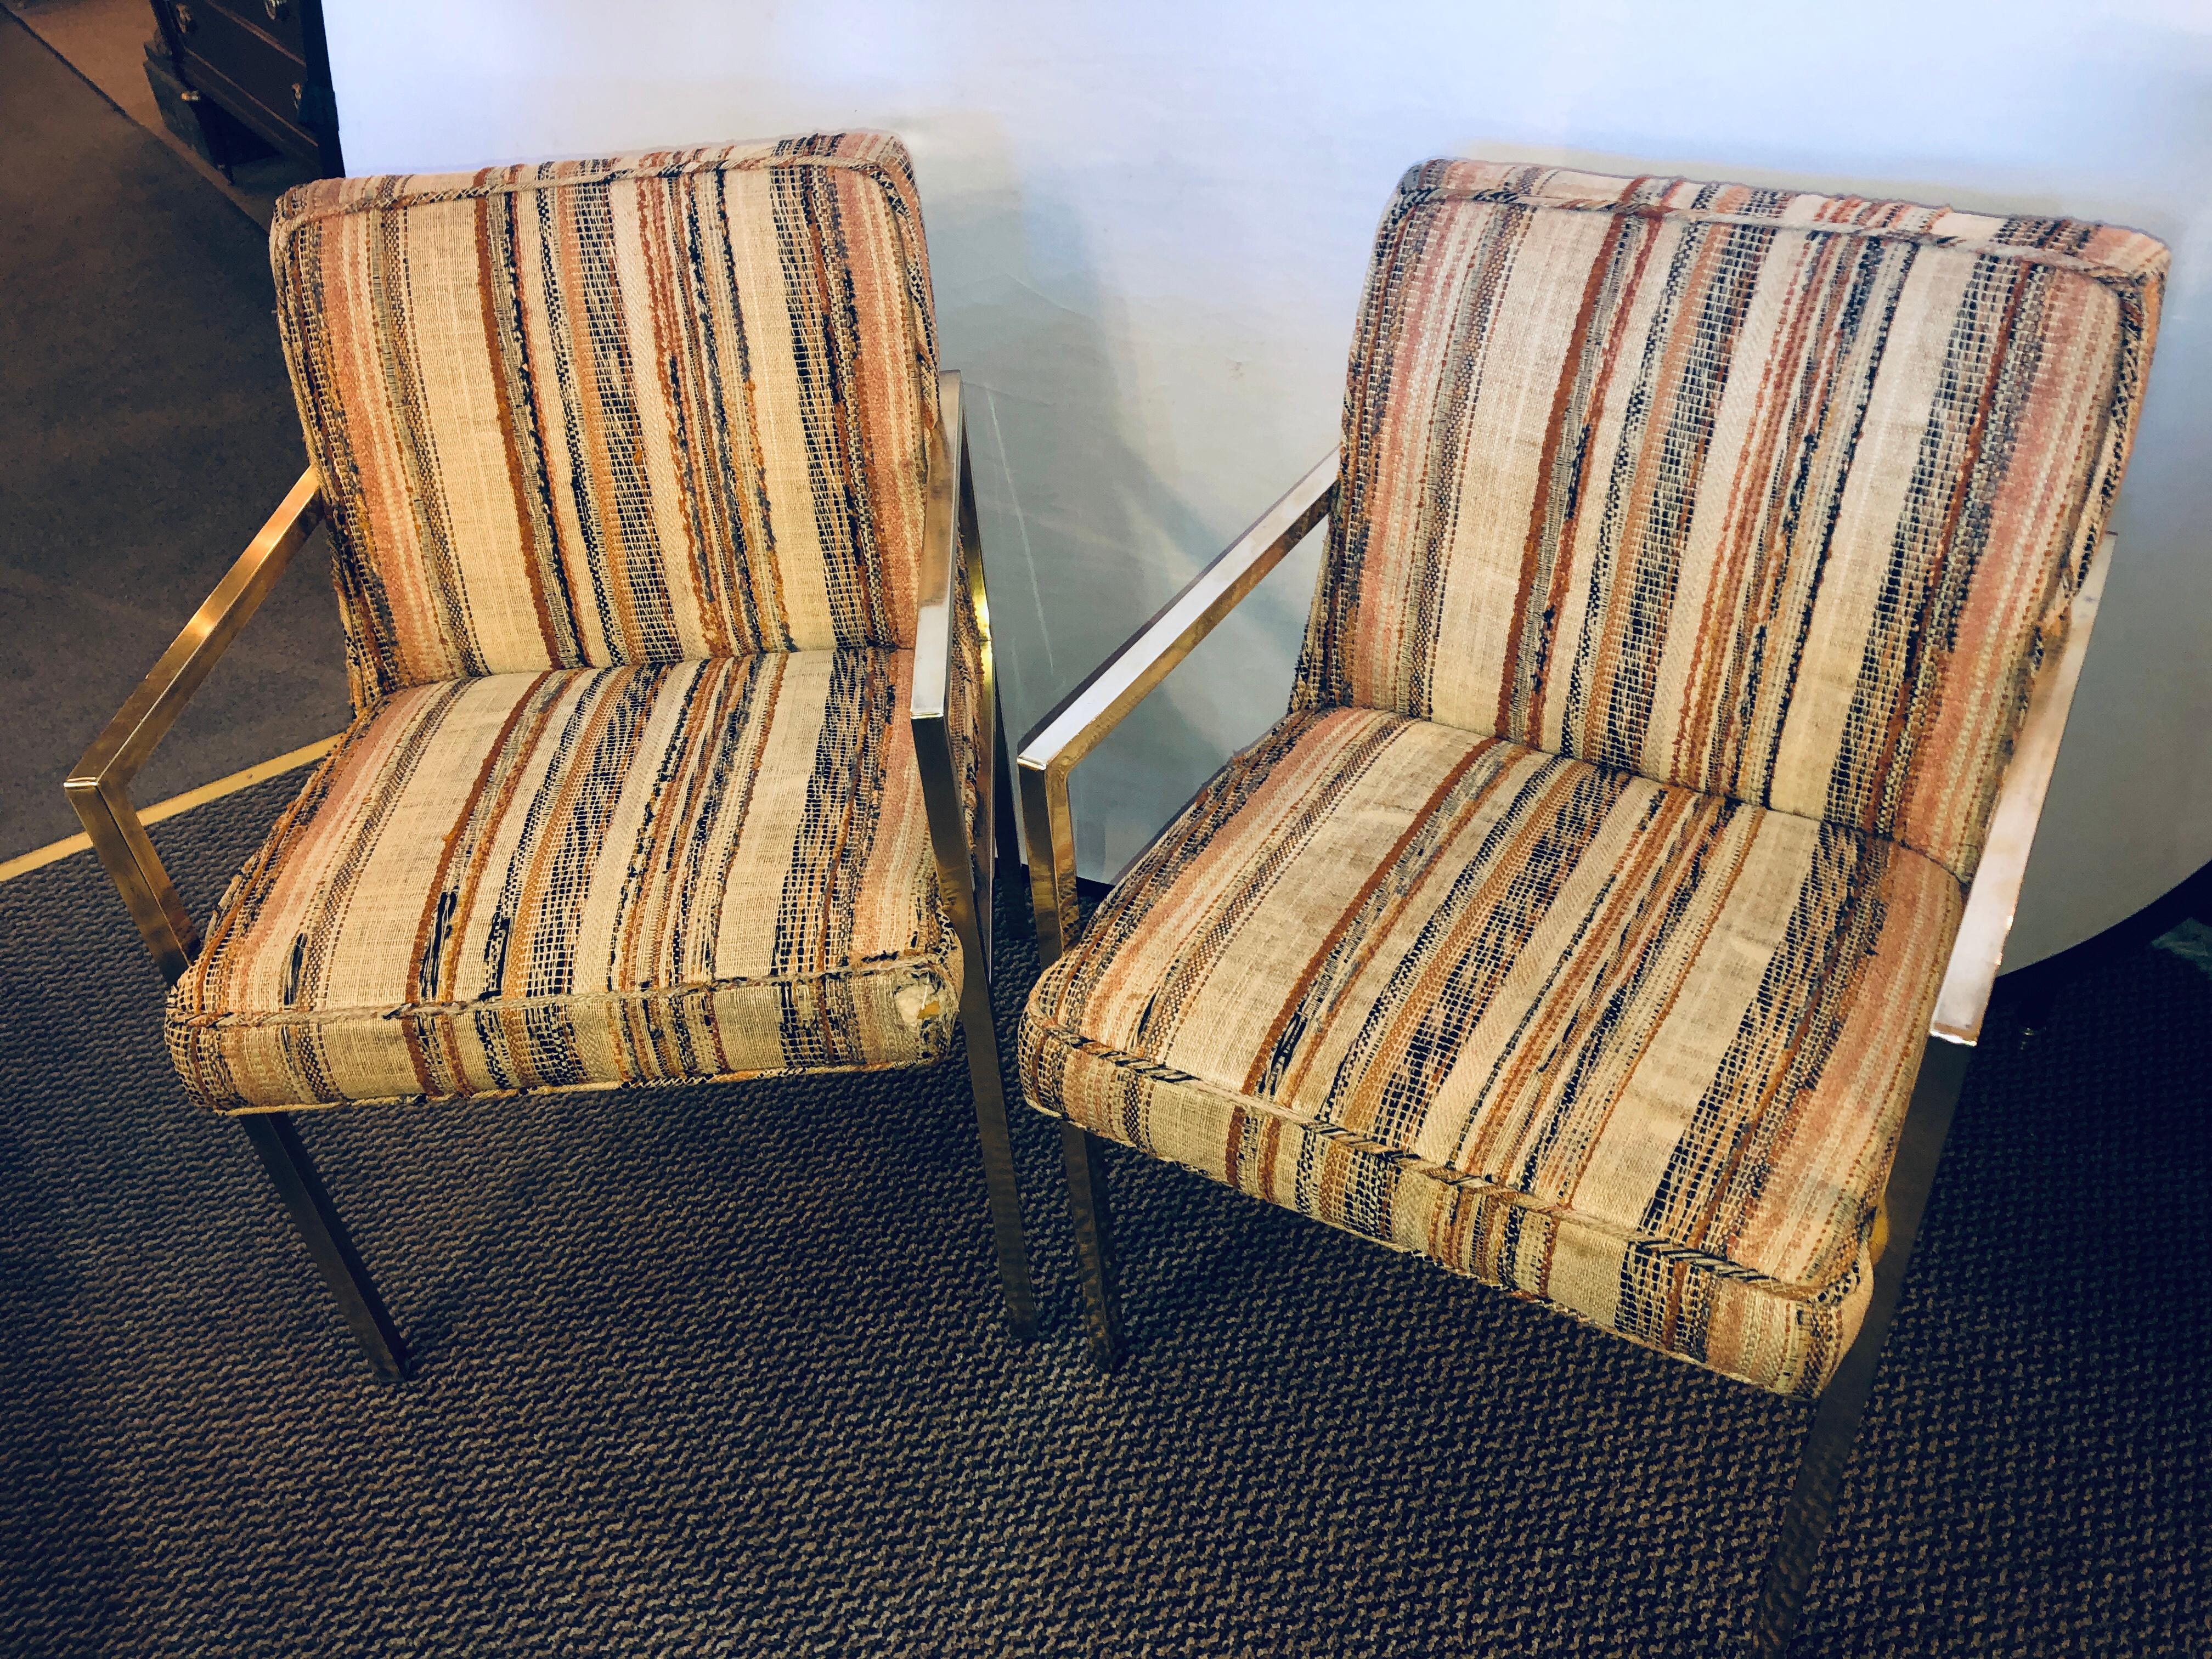 Pair of Swaim bronze patinated open armchairs. A pair of bronze patinated Mid-Century Modern open armchairs by Swaim Designs with vintage upholstery, possibly original, one with original paper tag dated 1975. (MORT1001/2) (TC) Dimensions: 32